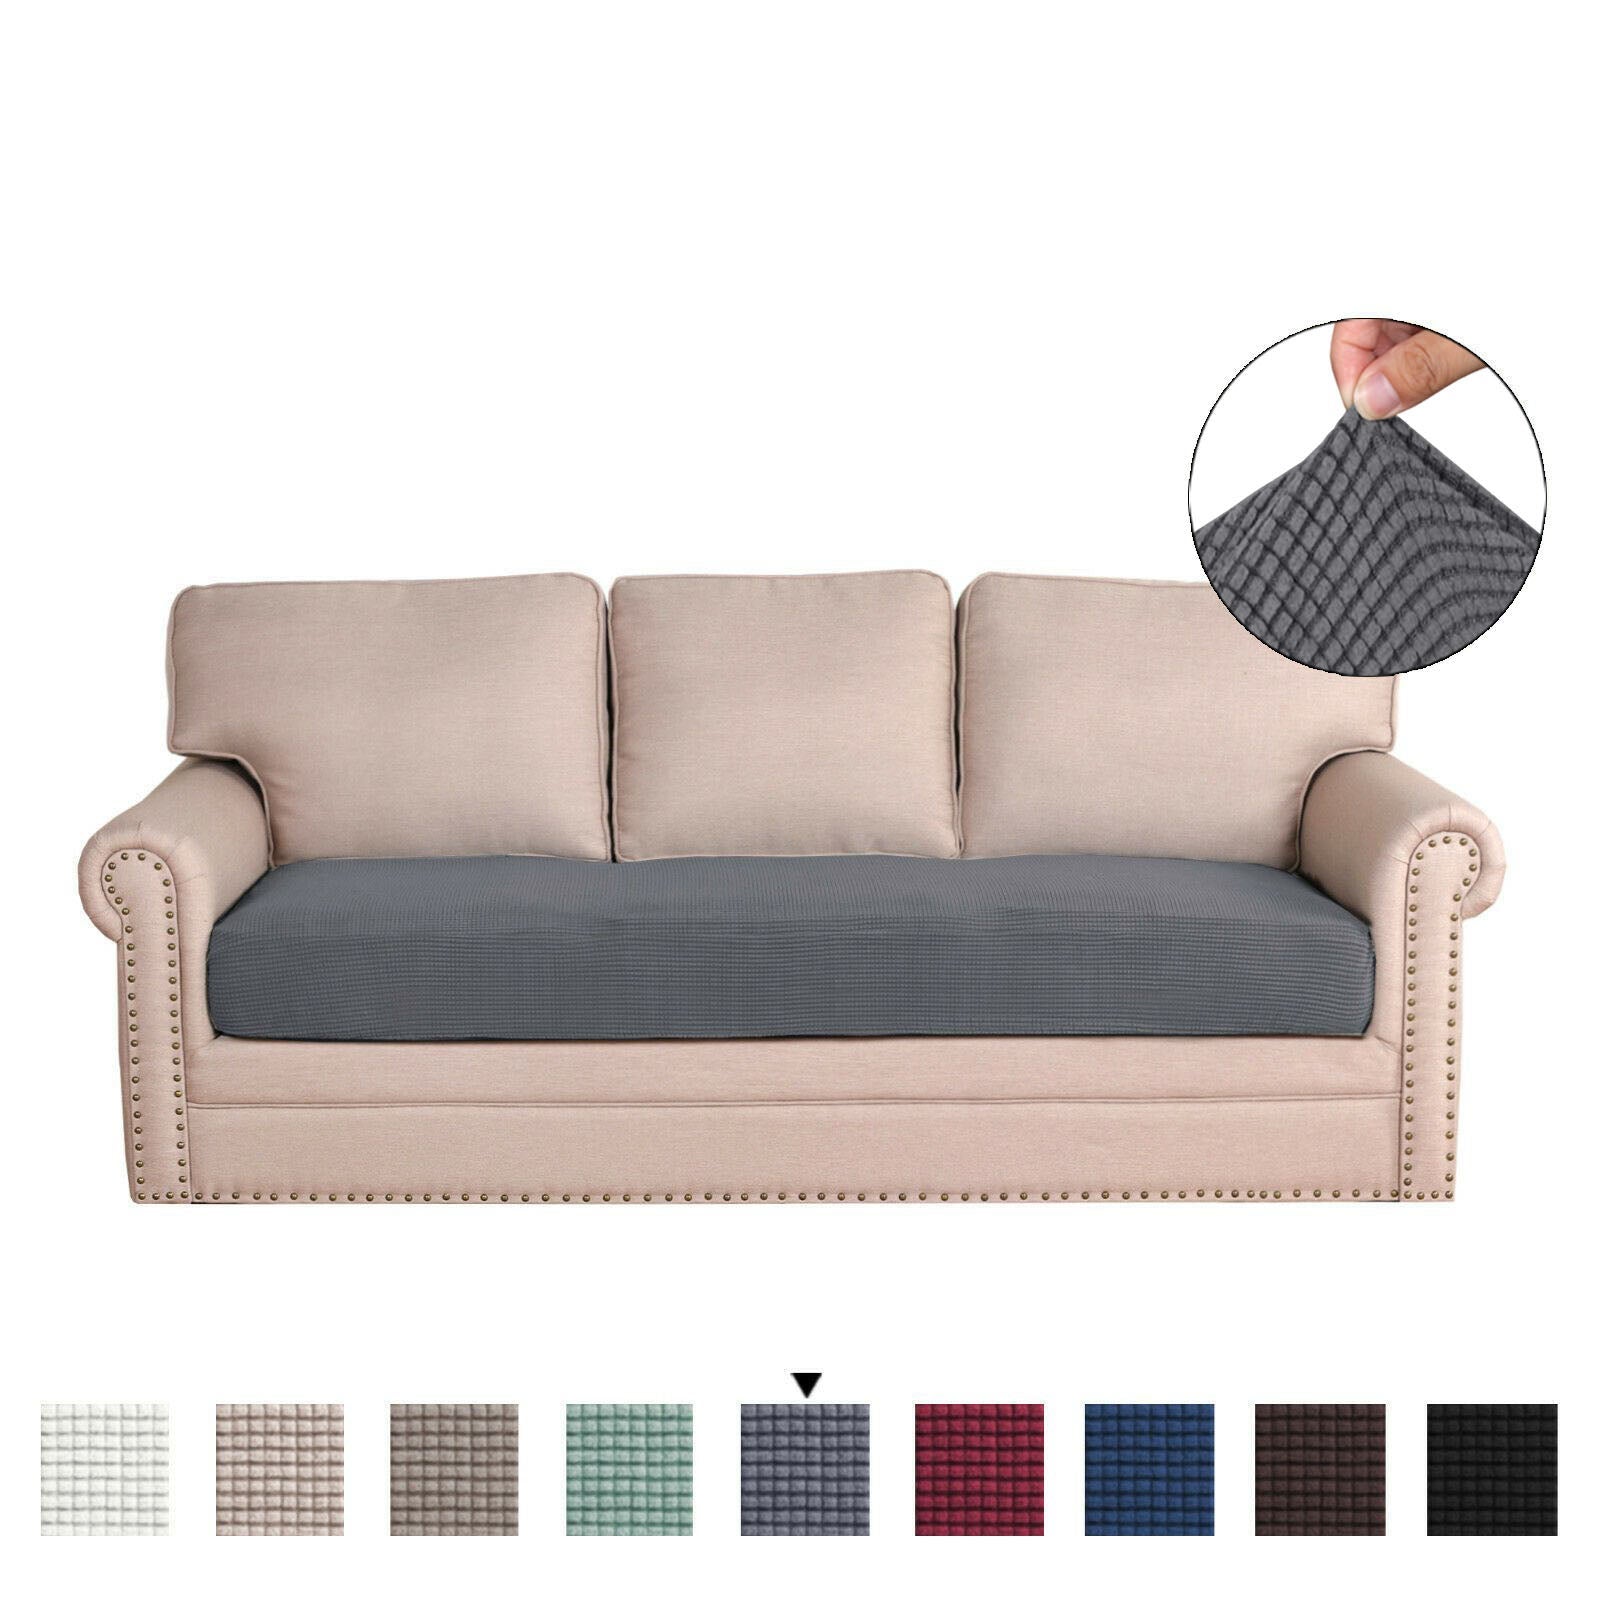 Stretch Sofa Seat Cushion Cover Seat Cover for Couch Slip Cover for Sofa Cushion